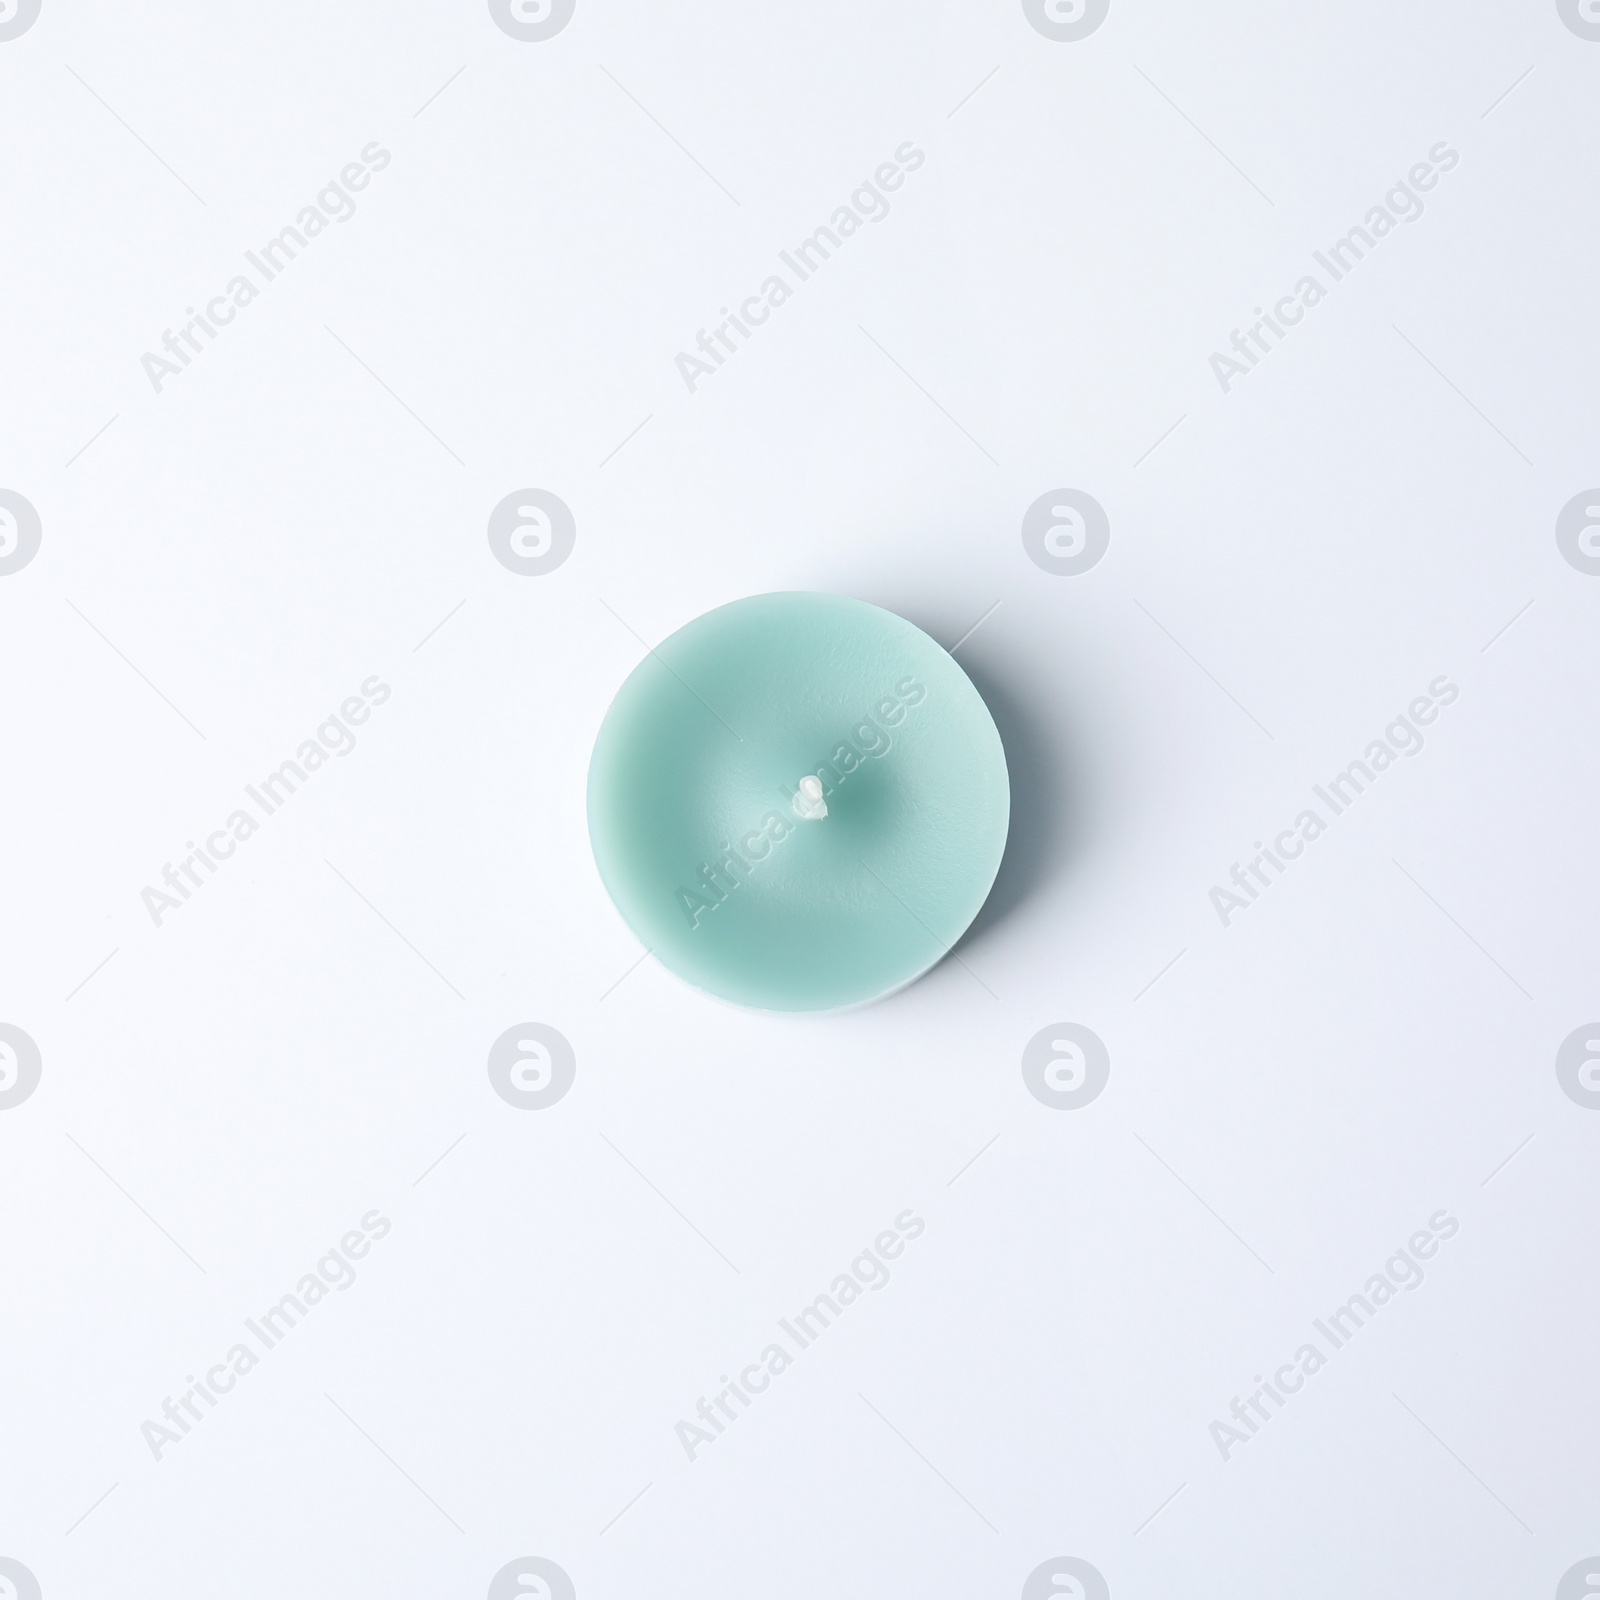 Photo of Light blue wax decorative candle isolated on white, top view